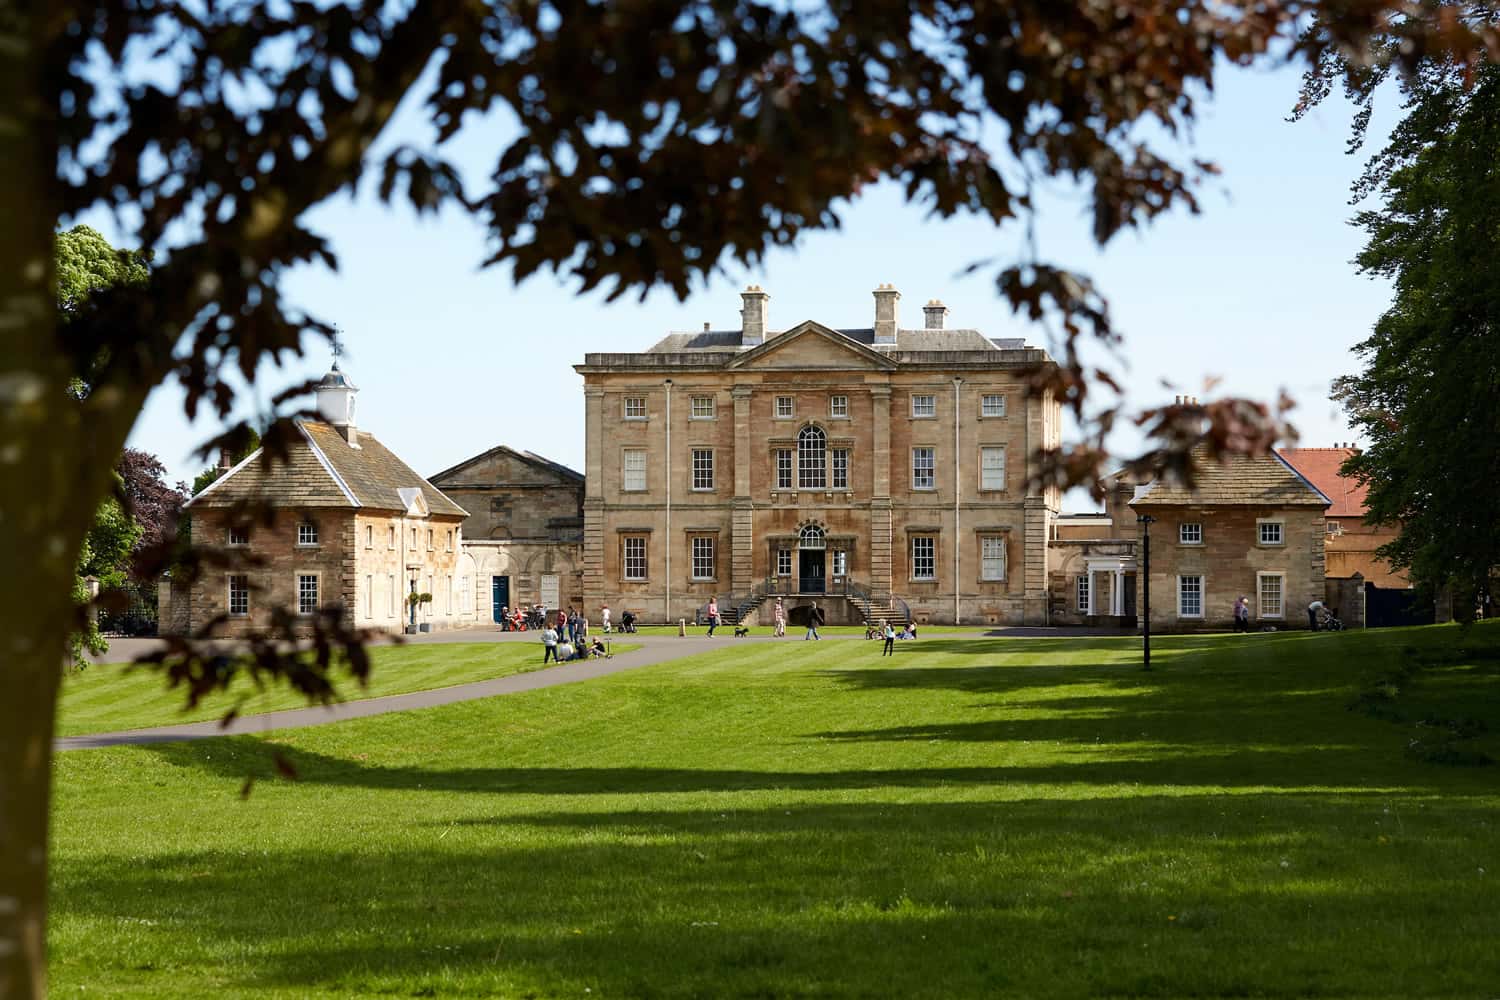 Cusworth Hall and Park for hire